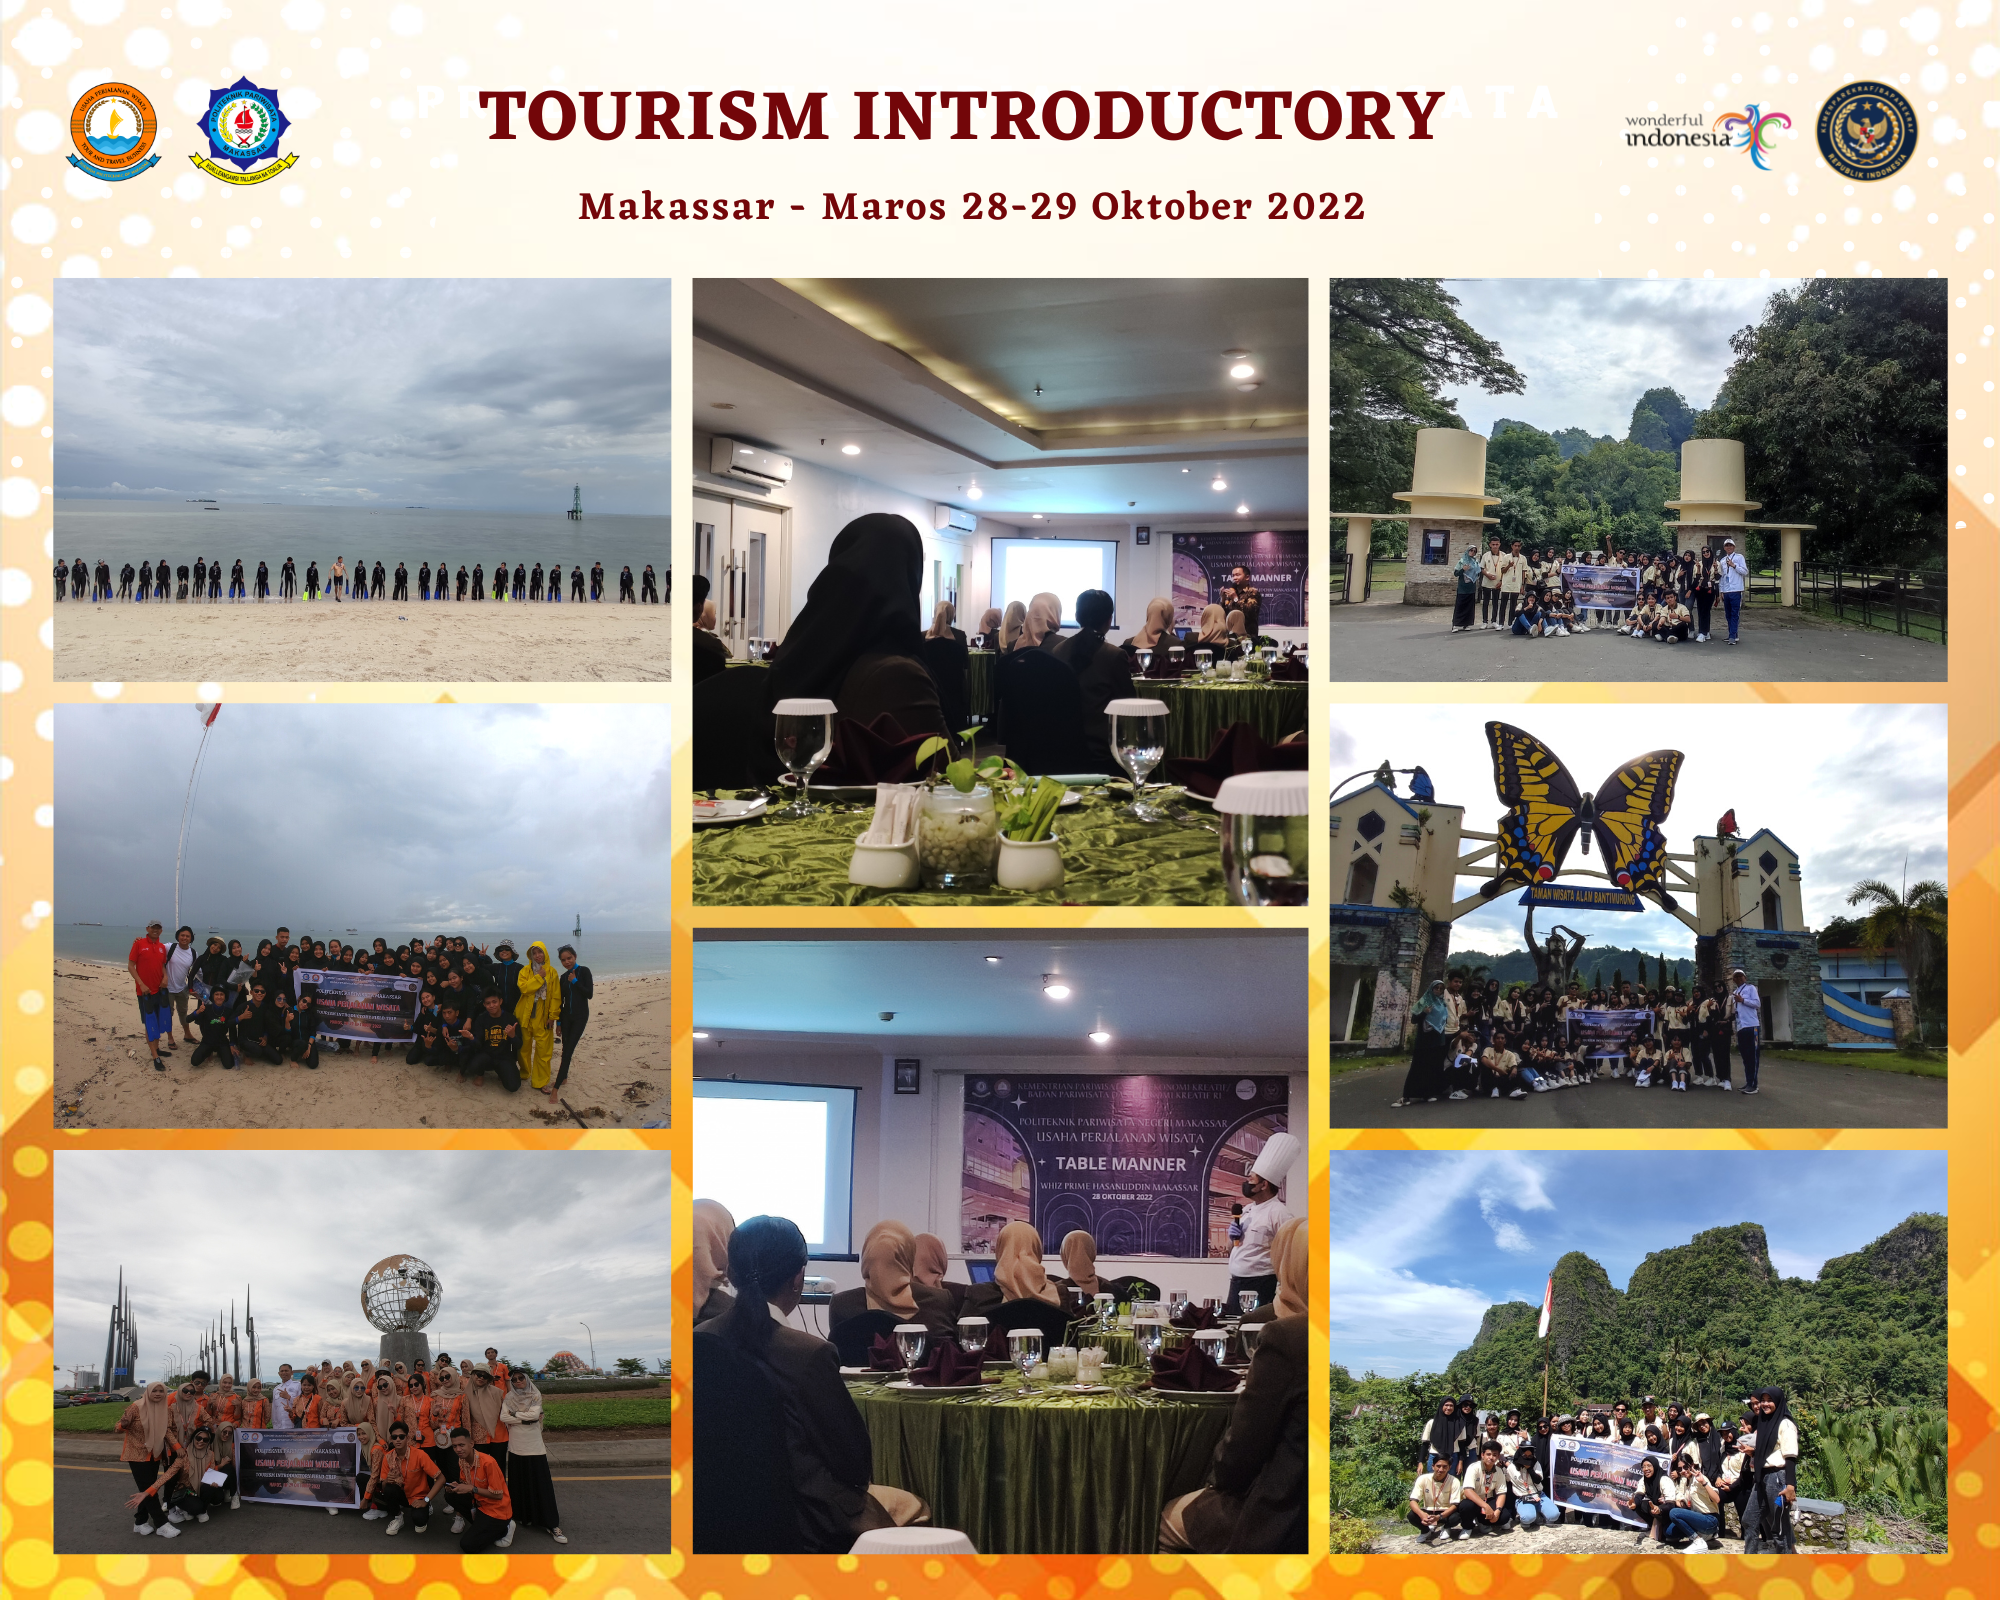 TOURISM INTRODUCTORY FIELD TRIP